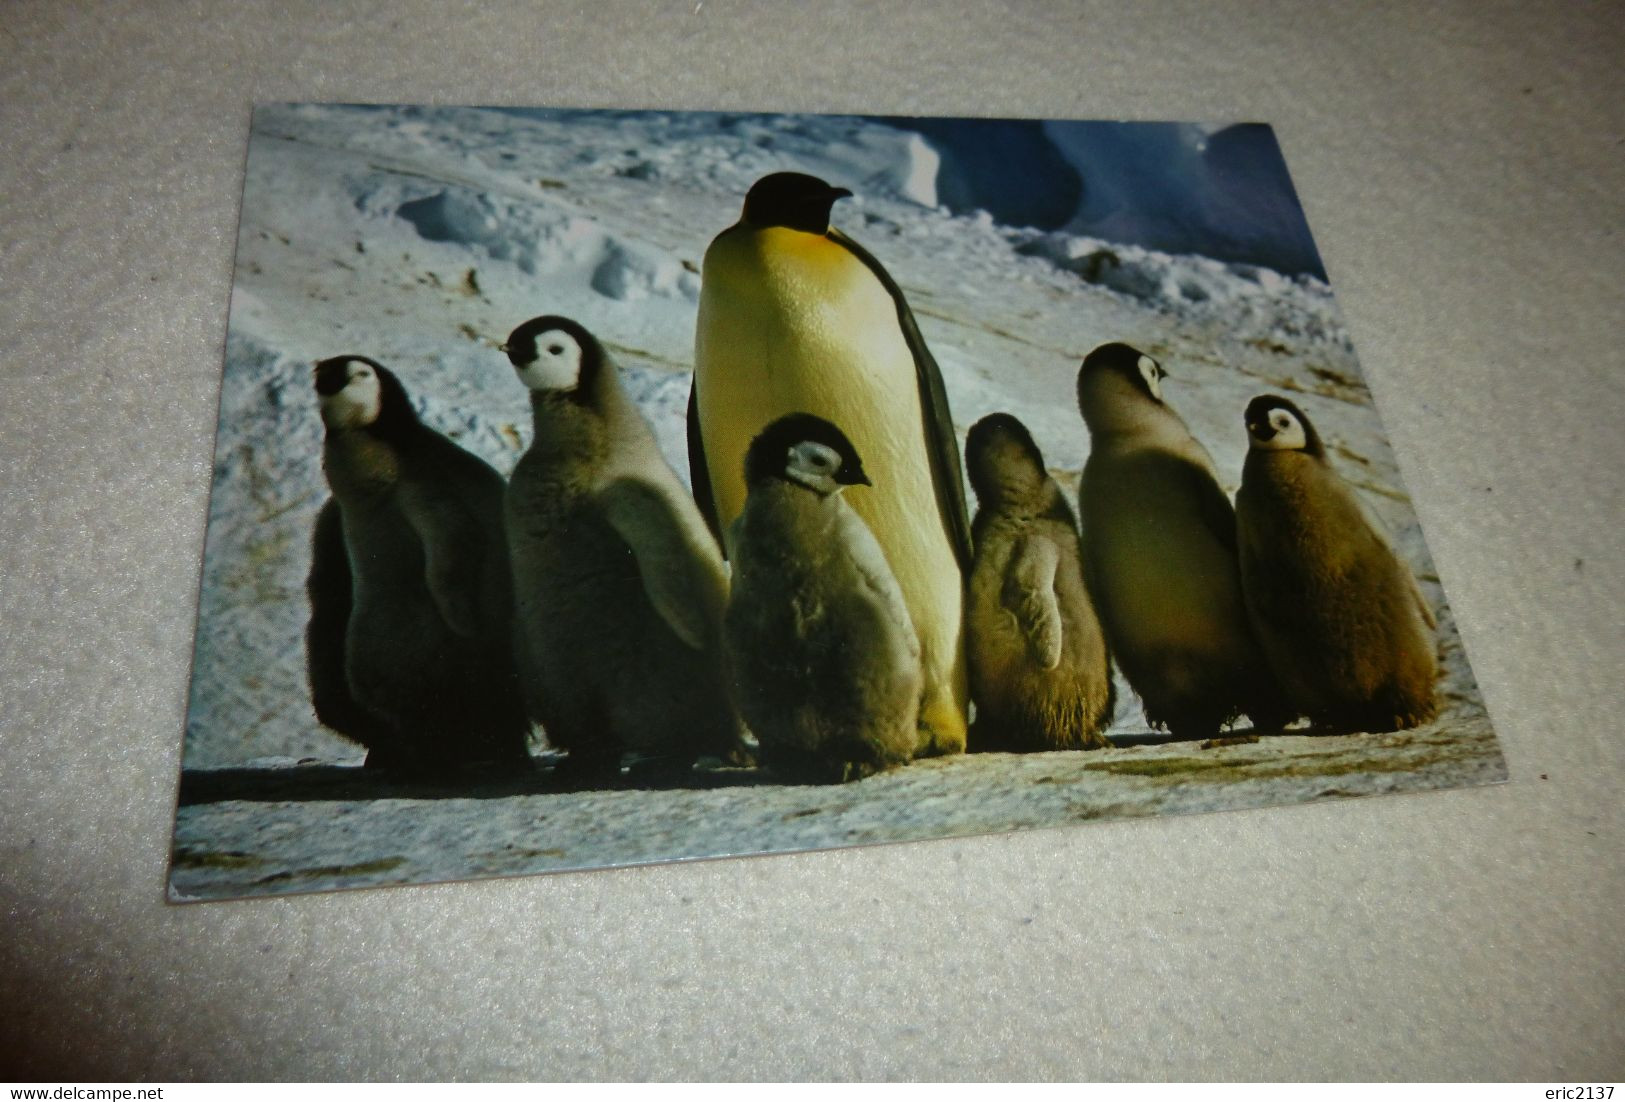 BELLE CARTE..MS POLAR BJORN 1986-1987... ..PHOTO R. GUILLARD MANCHOT EMPEREUR ET OUSSINS - TAAF : French Southern And Antarctic Lands